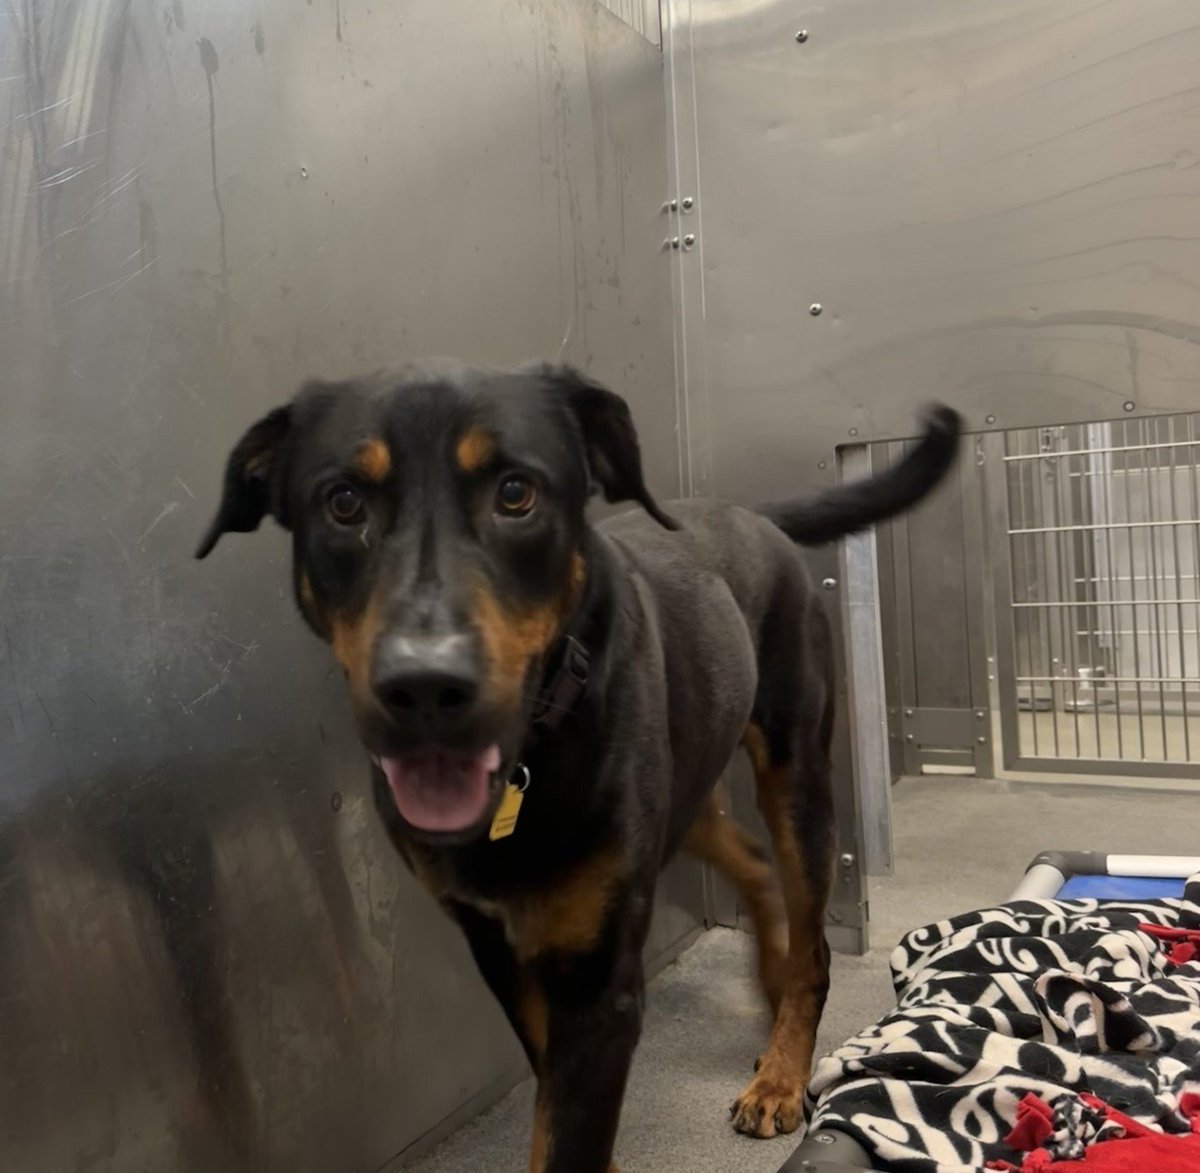 🆘🐶TBK 4/29 #DallasTX Champ #A1203928 3 yrs Has issues with male dogs and mounts. Maybe an only pet preferred. OUT OF STATE/CANADA #AdoptMe Adopt DASAdopt@dallas.gov. Foster DASFoster@dallas.gov. Rescue DASRescue@dallas.gov.